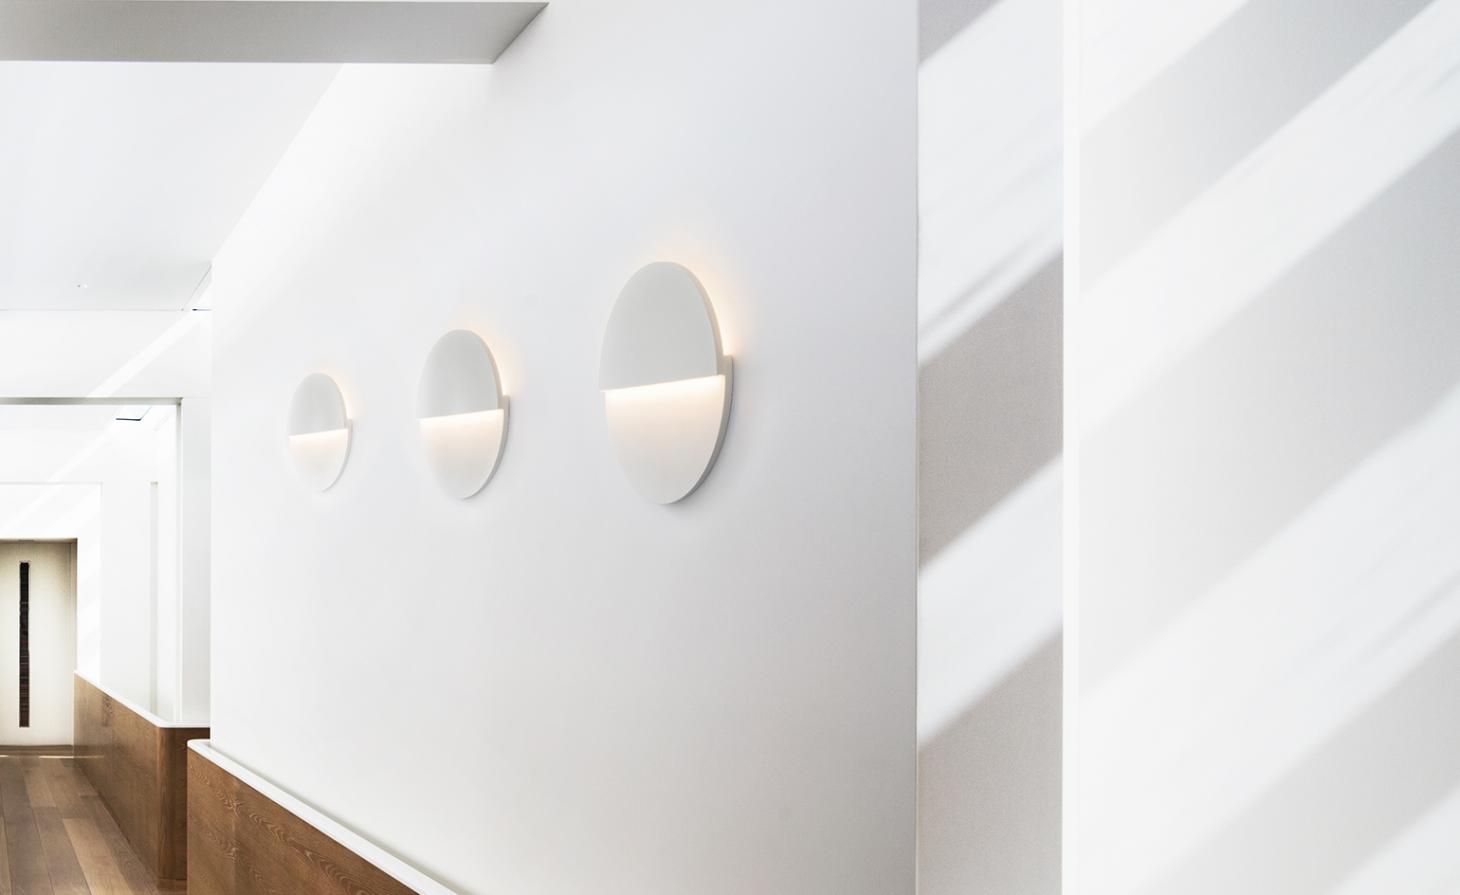 richard meier debuts new lighting collection at ralph pucci gallery new york-1